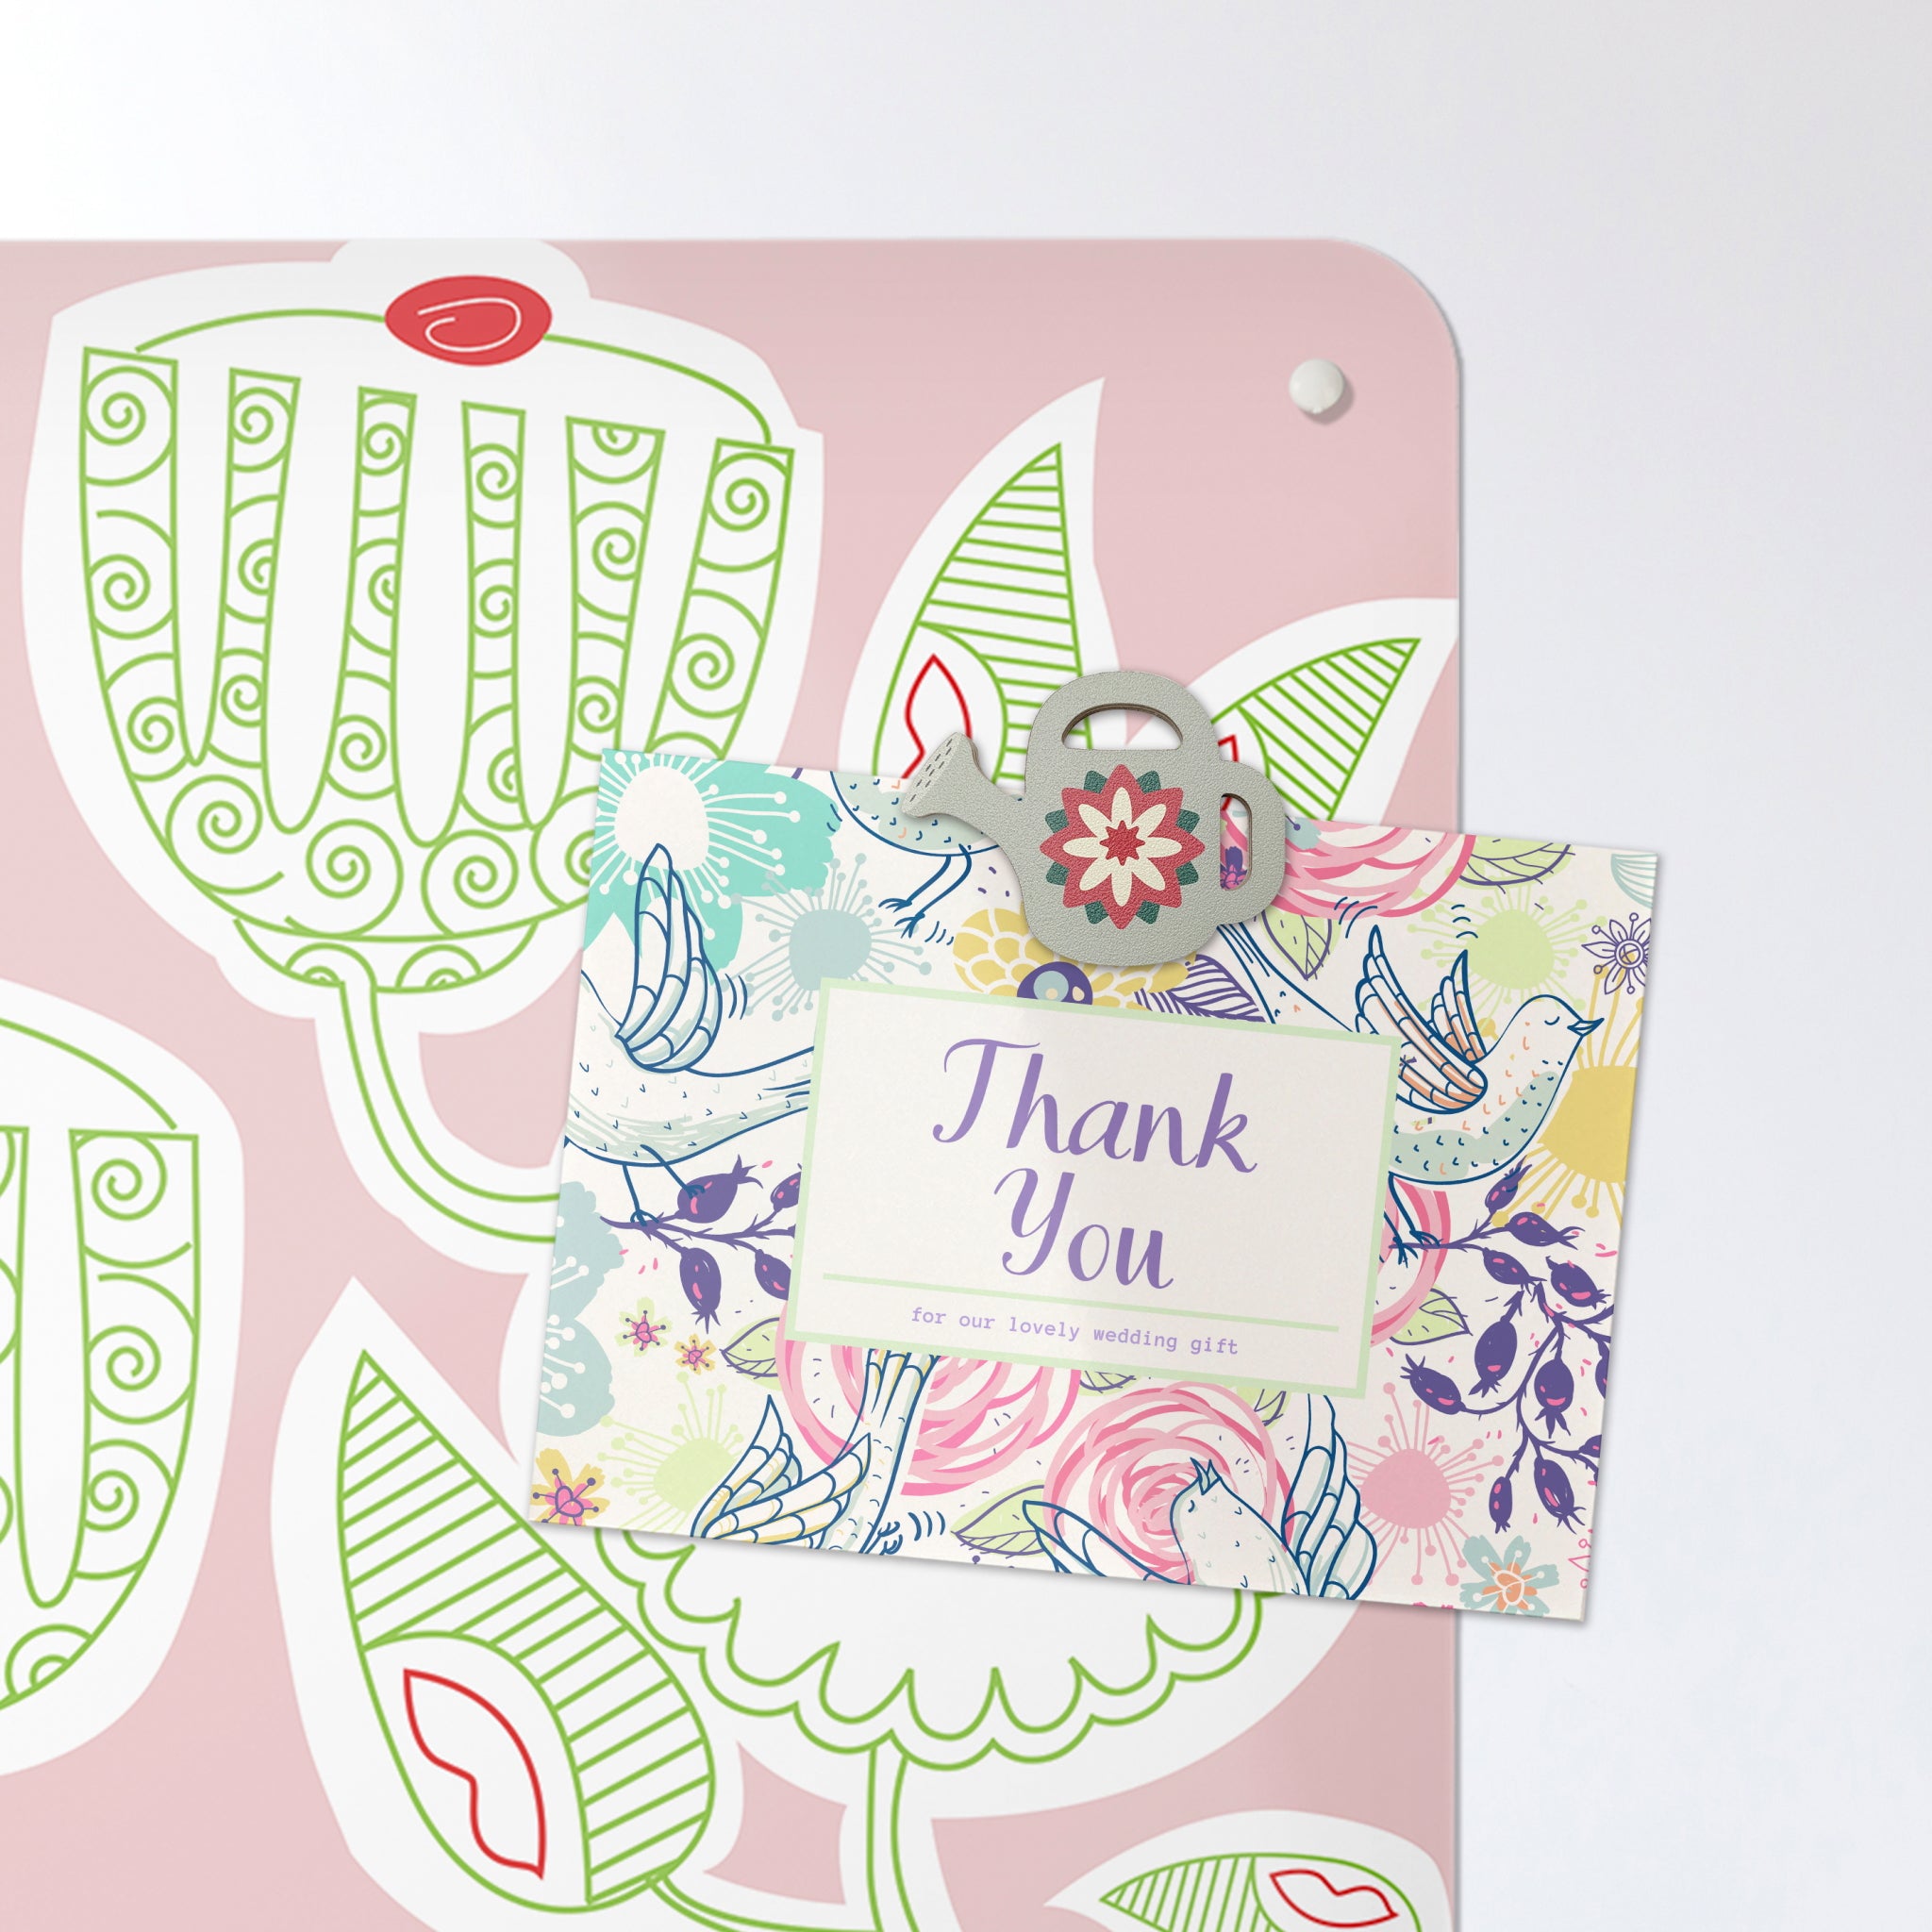 A postcard on a pink cupcake plant design magnetic board or metal wall art panel with a plywood watering can design fridge magnet